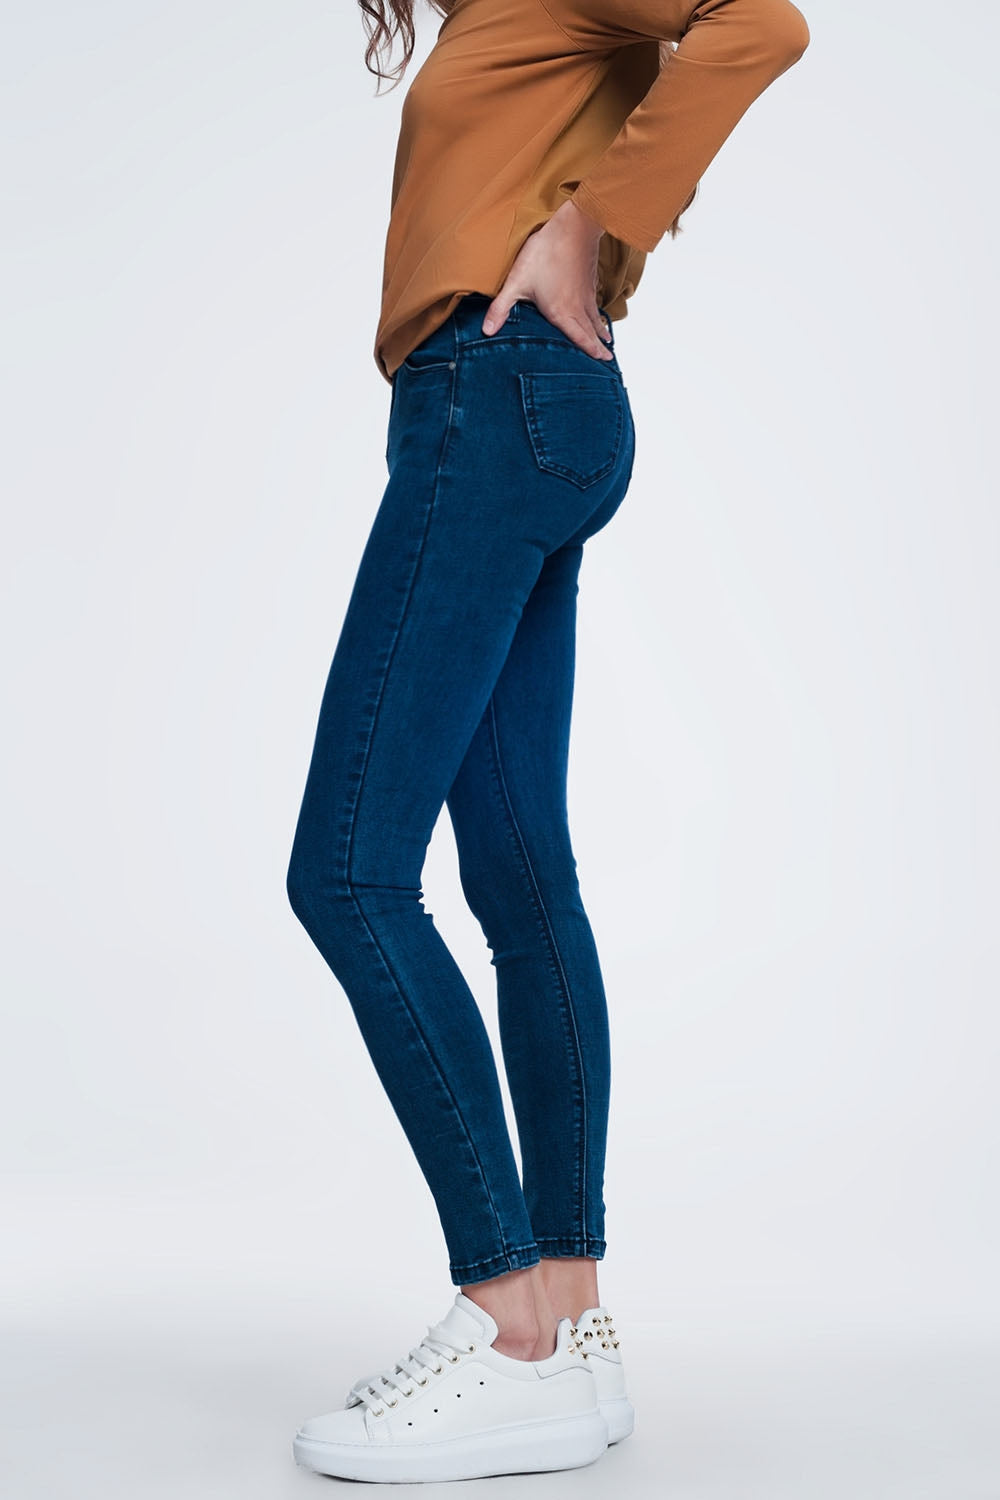 Navy blue skinny jeans with high waistJeans